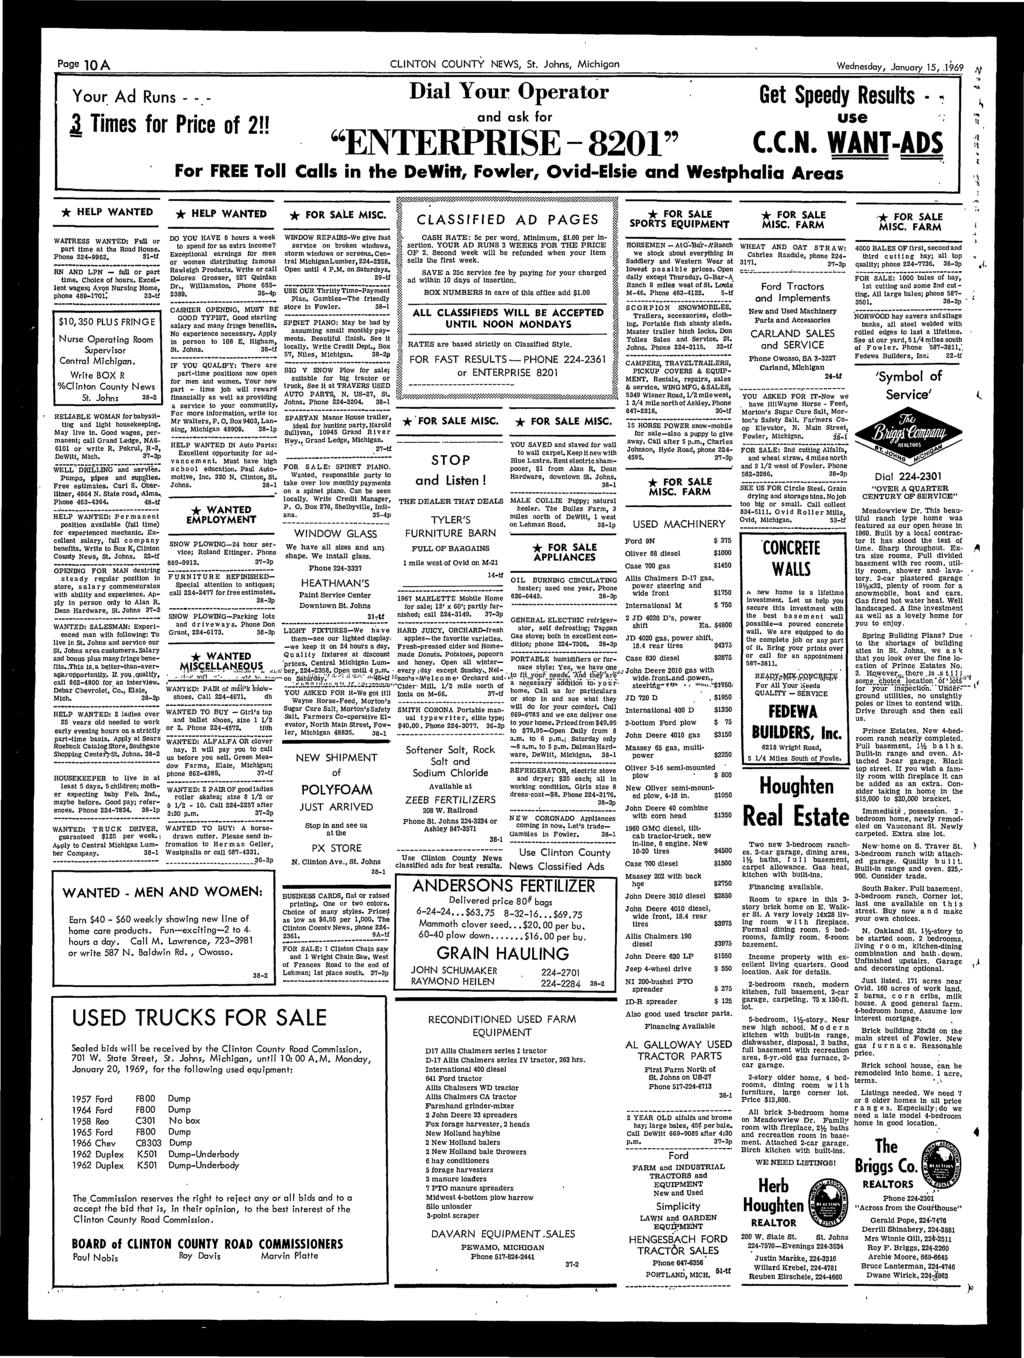 Page 1QA CLINTON COUNTY NEWS, St. Johns, Michigan Wednesday, January 15,.1969 y Your Ad Runs - -.- 1 Times for Price of 2!